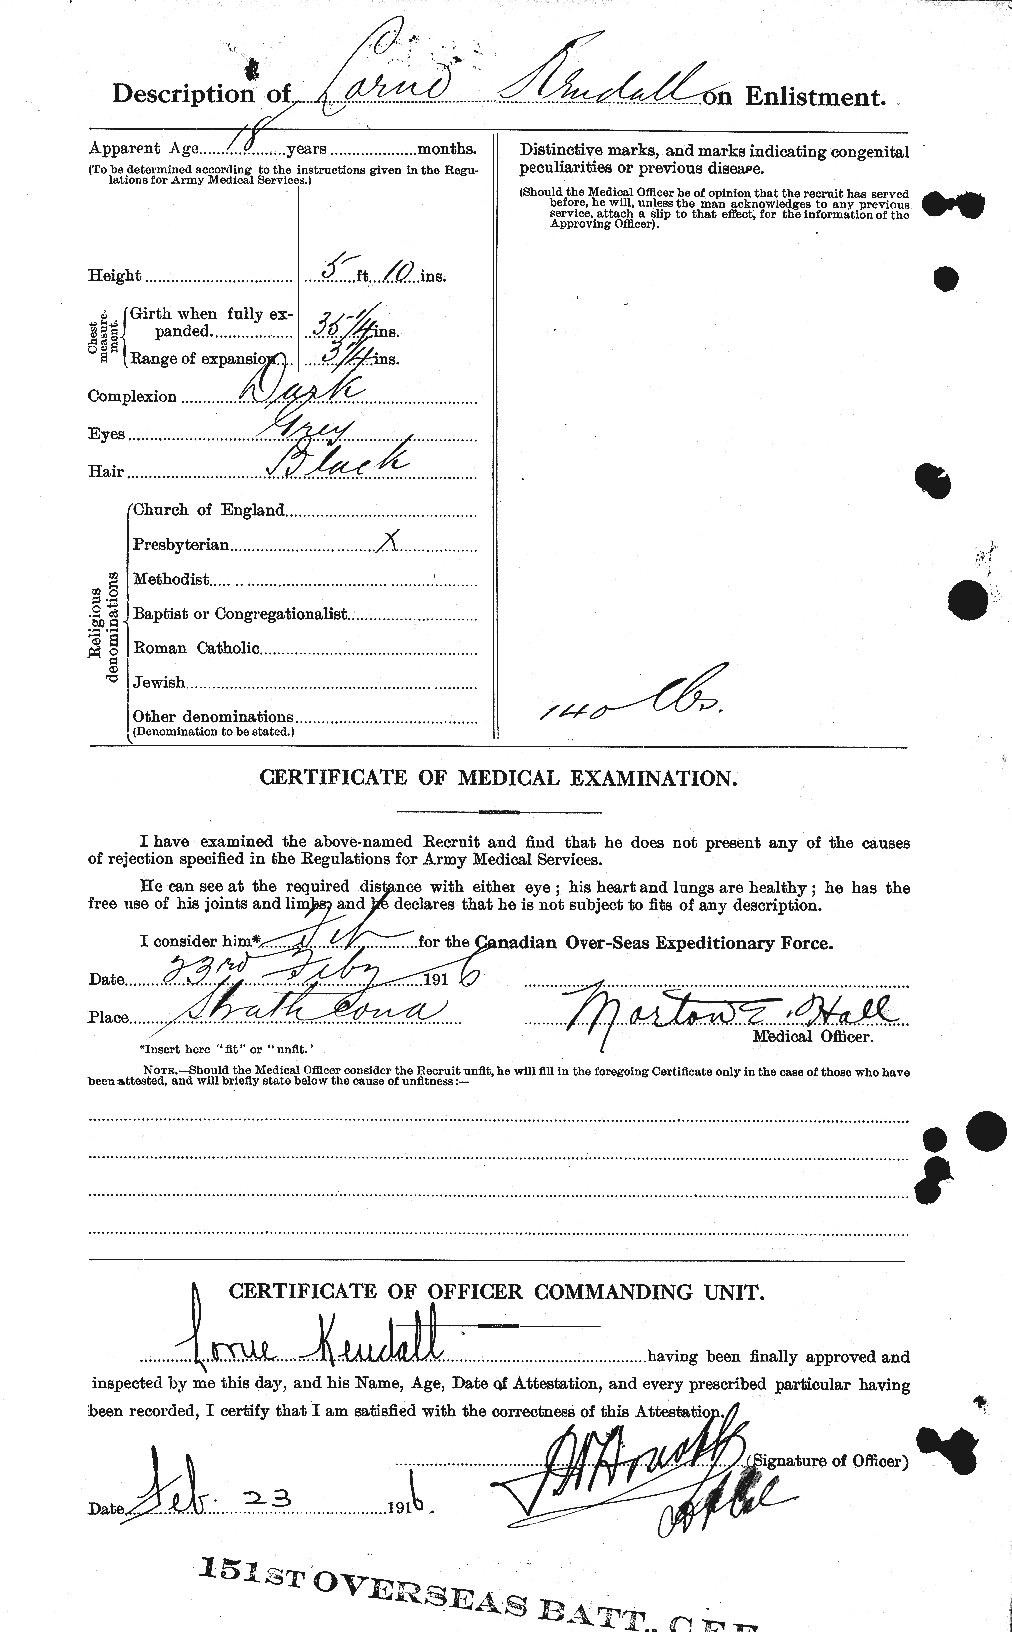 Personnel Records of the First World War - CEF 435591b